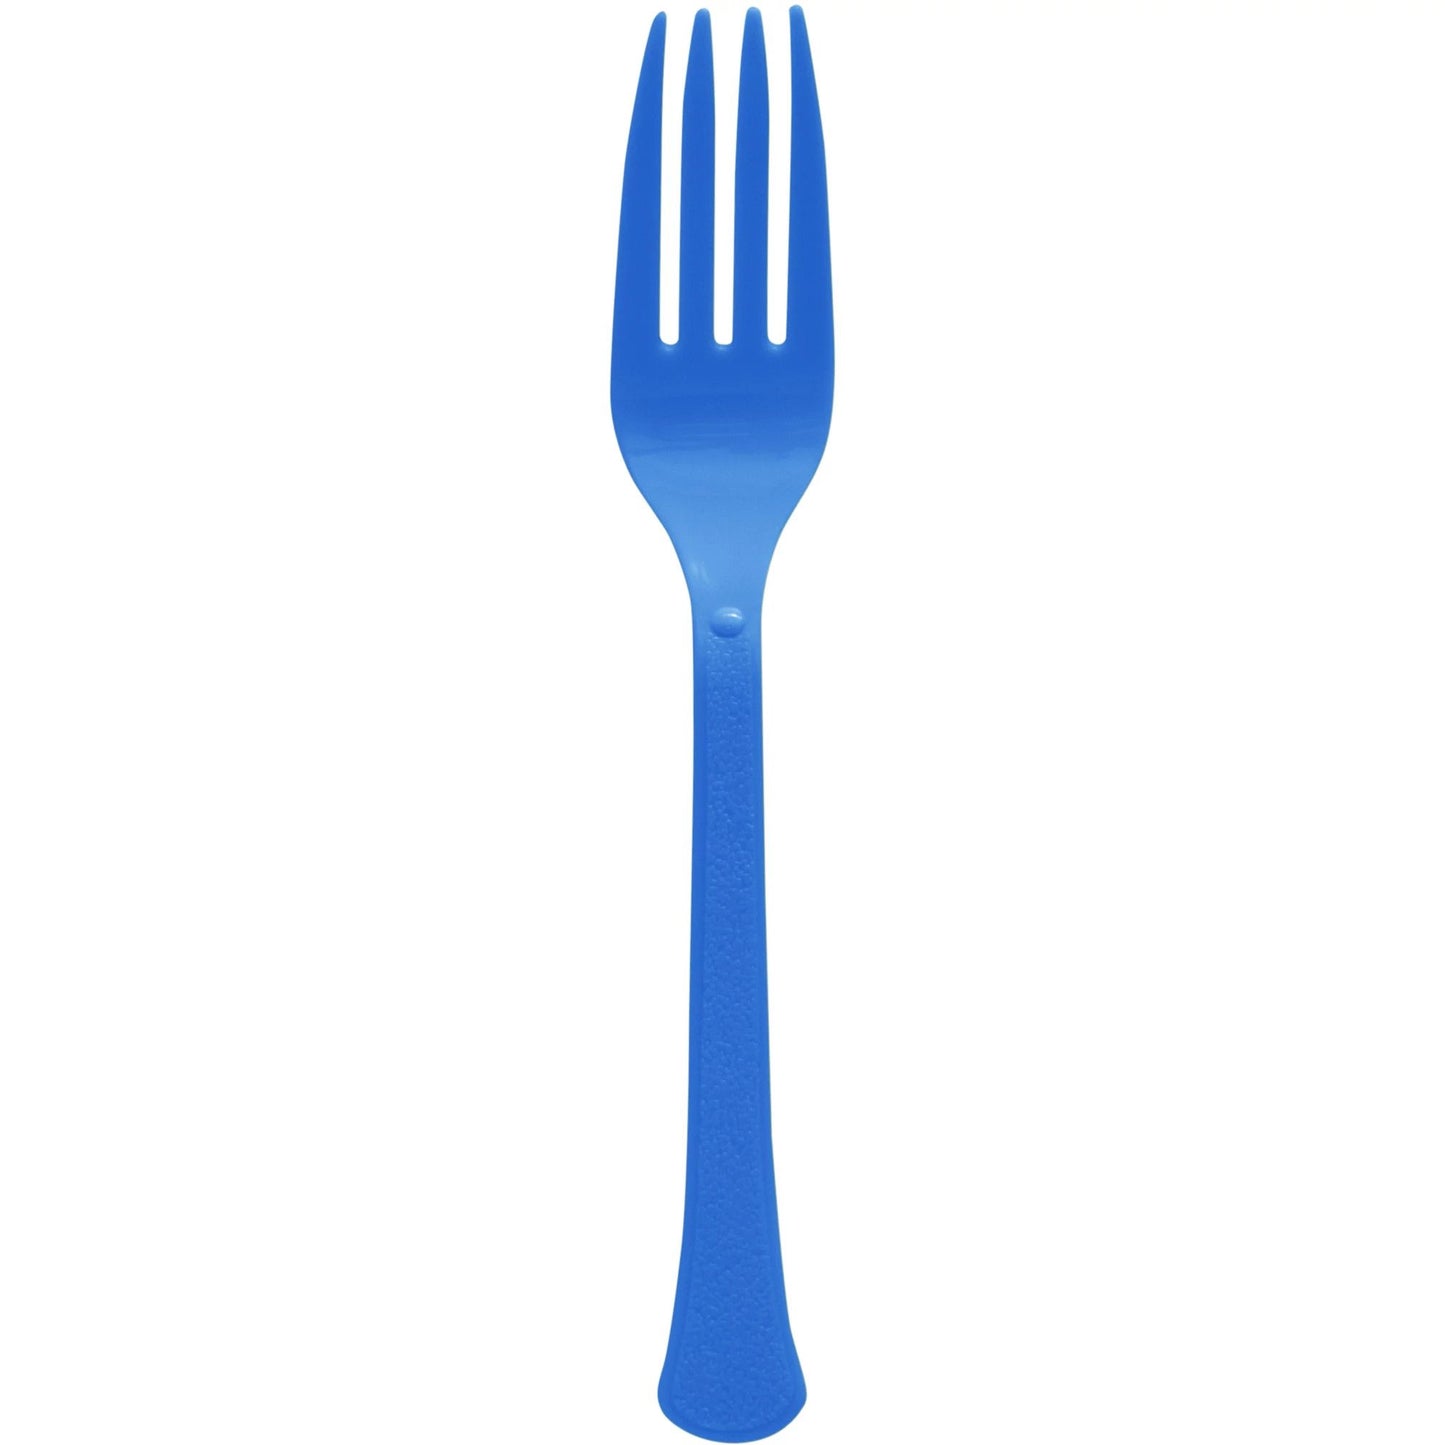 Reusable Plastic Forks, High Ct. -Bright Royal Blue 50ct